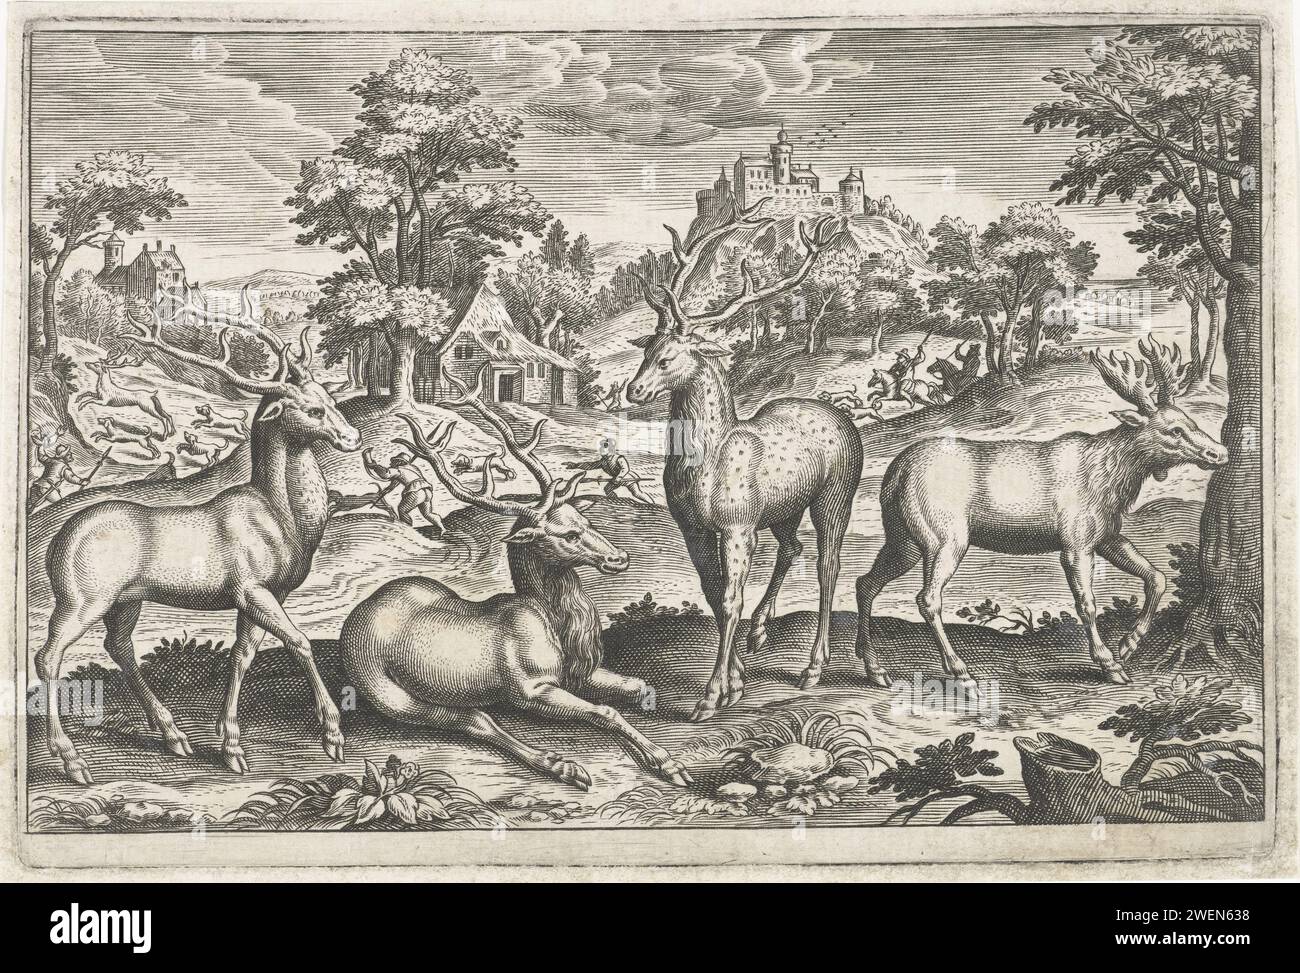 Herten, Anonymous, After Adriaen Collaert, 1595 - 1652 print Two deer, a Damhert and a moose in the foreground. A deer show in the background. The print is part of a series with animals as the subject.  paper engraving stag-hunting. hoofed animals: deer. hoofed animals: moose Stock Photo